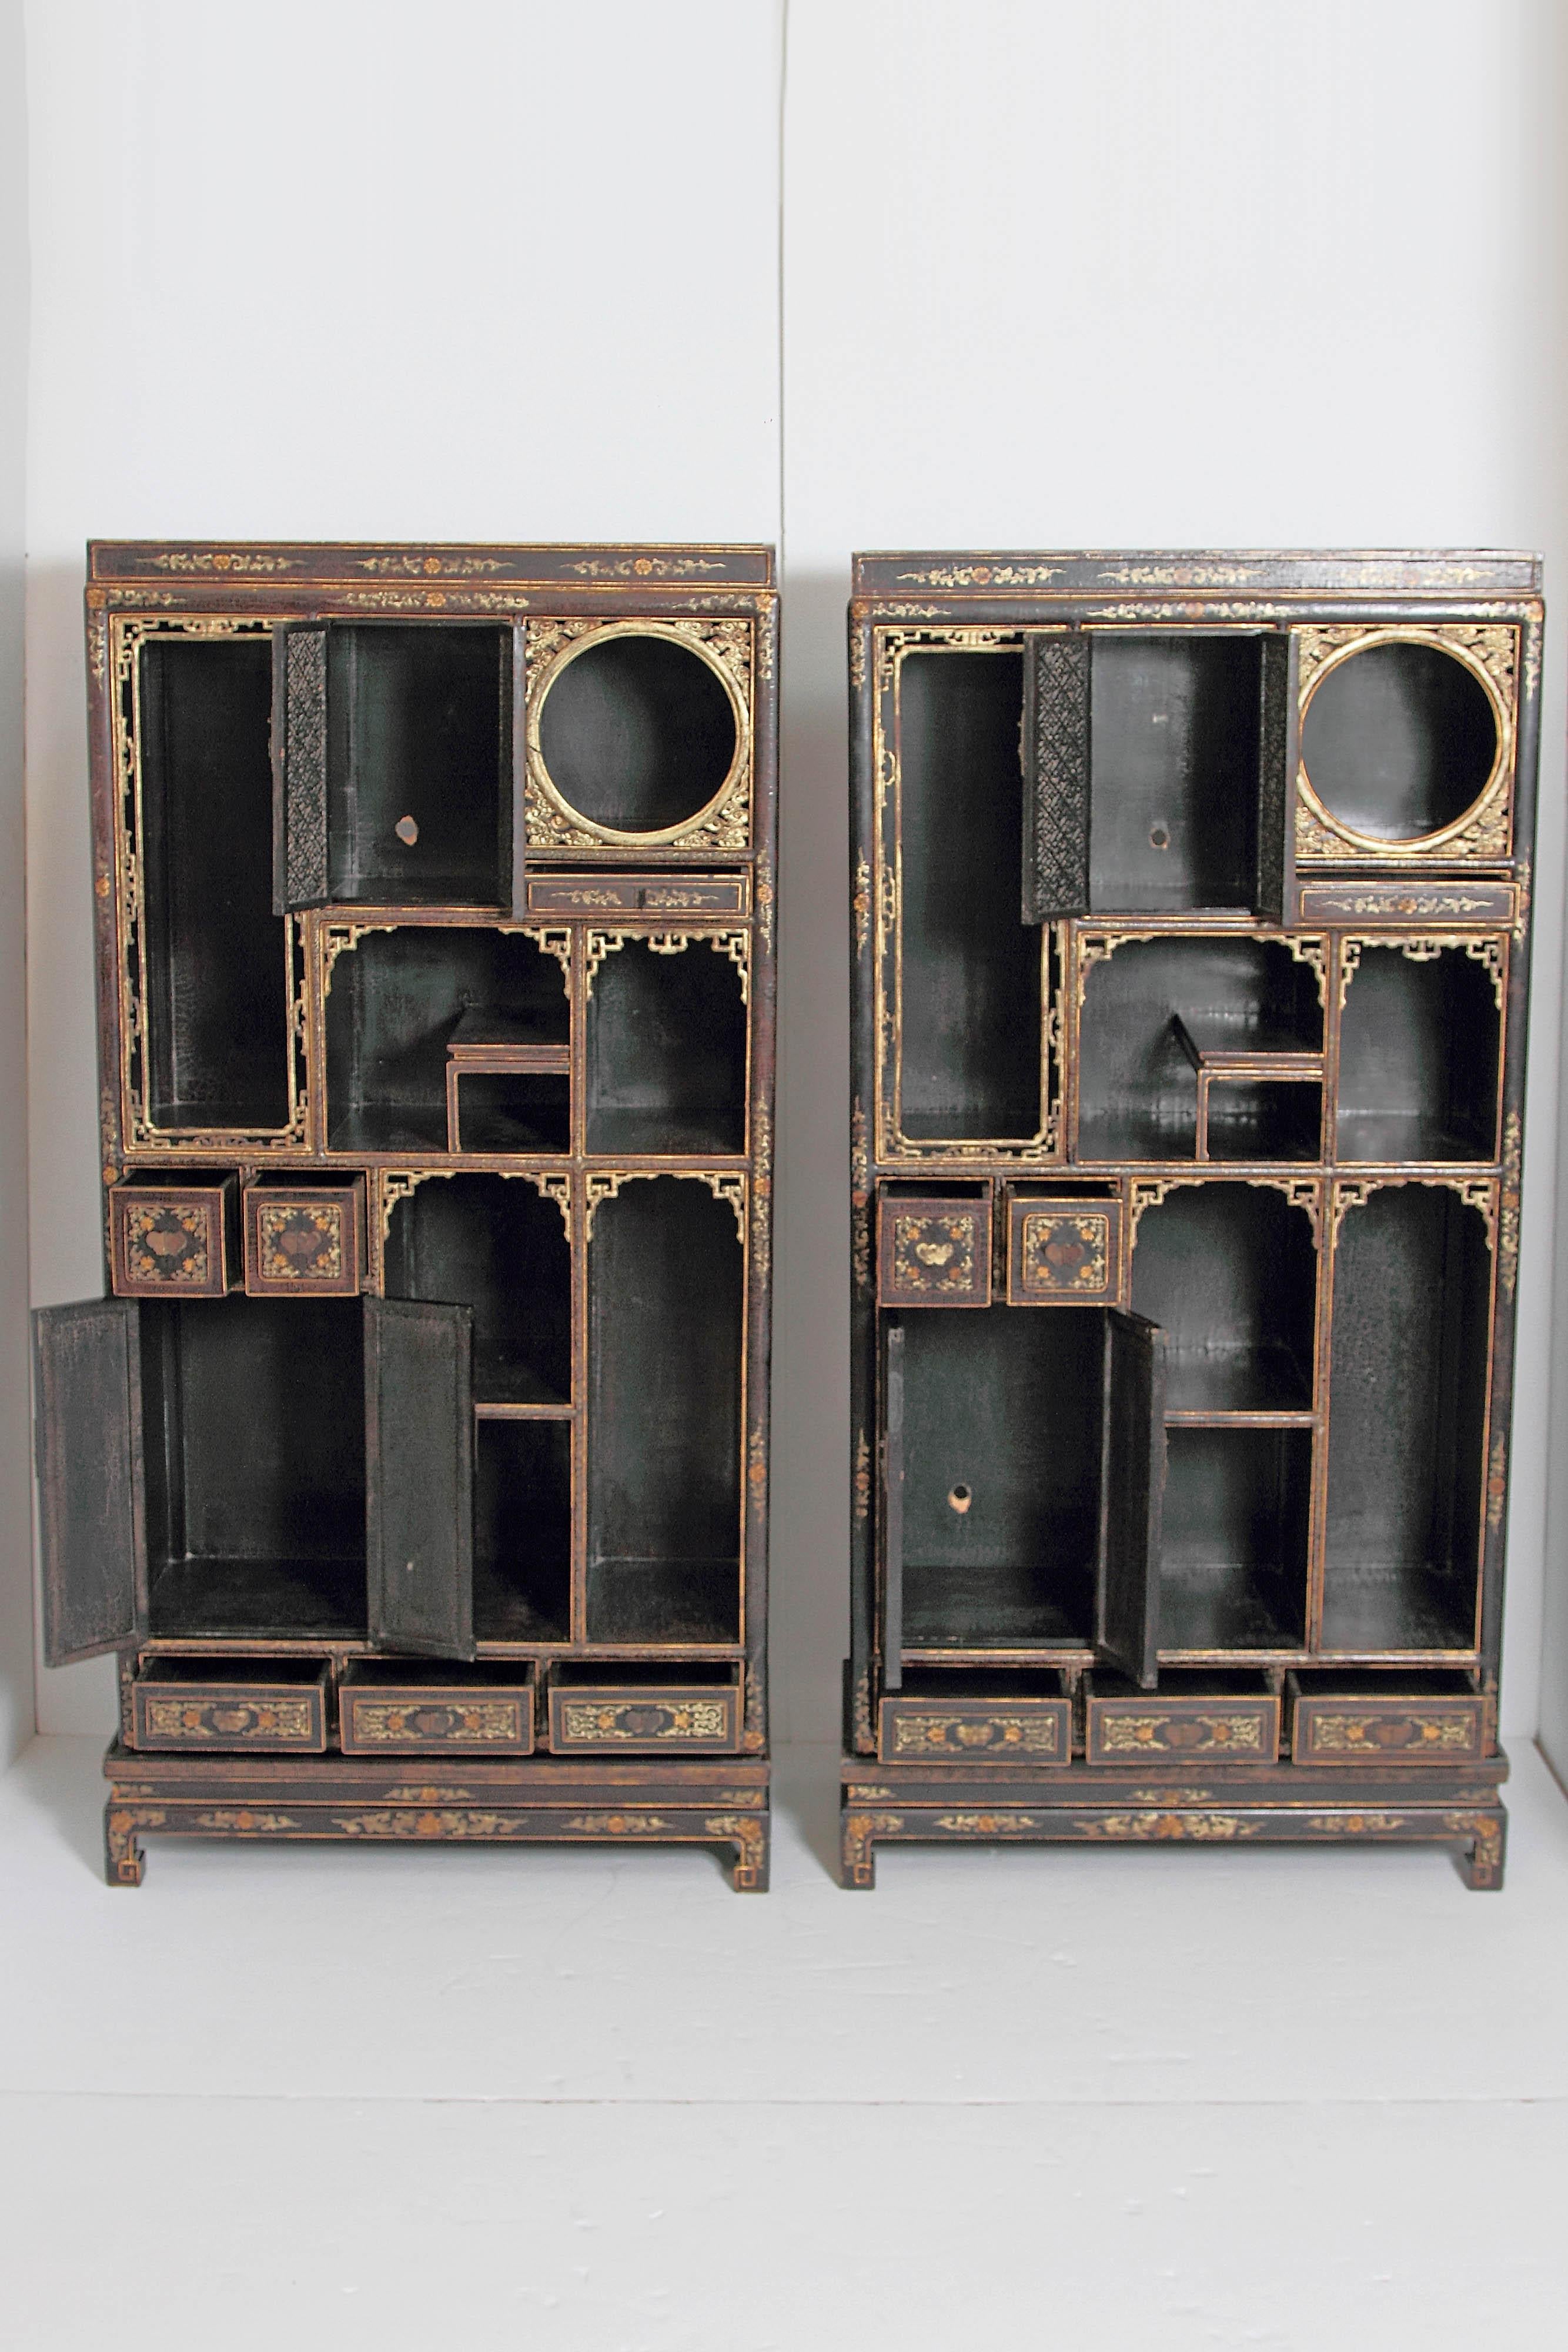 Pair of Chinese Black Lacquer Display Cabinets (Chinesisch)